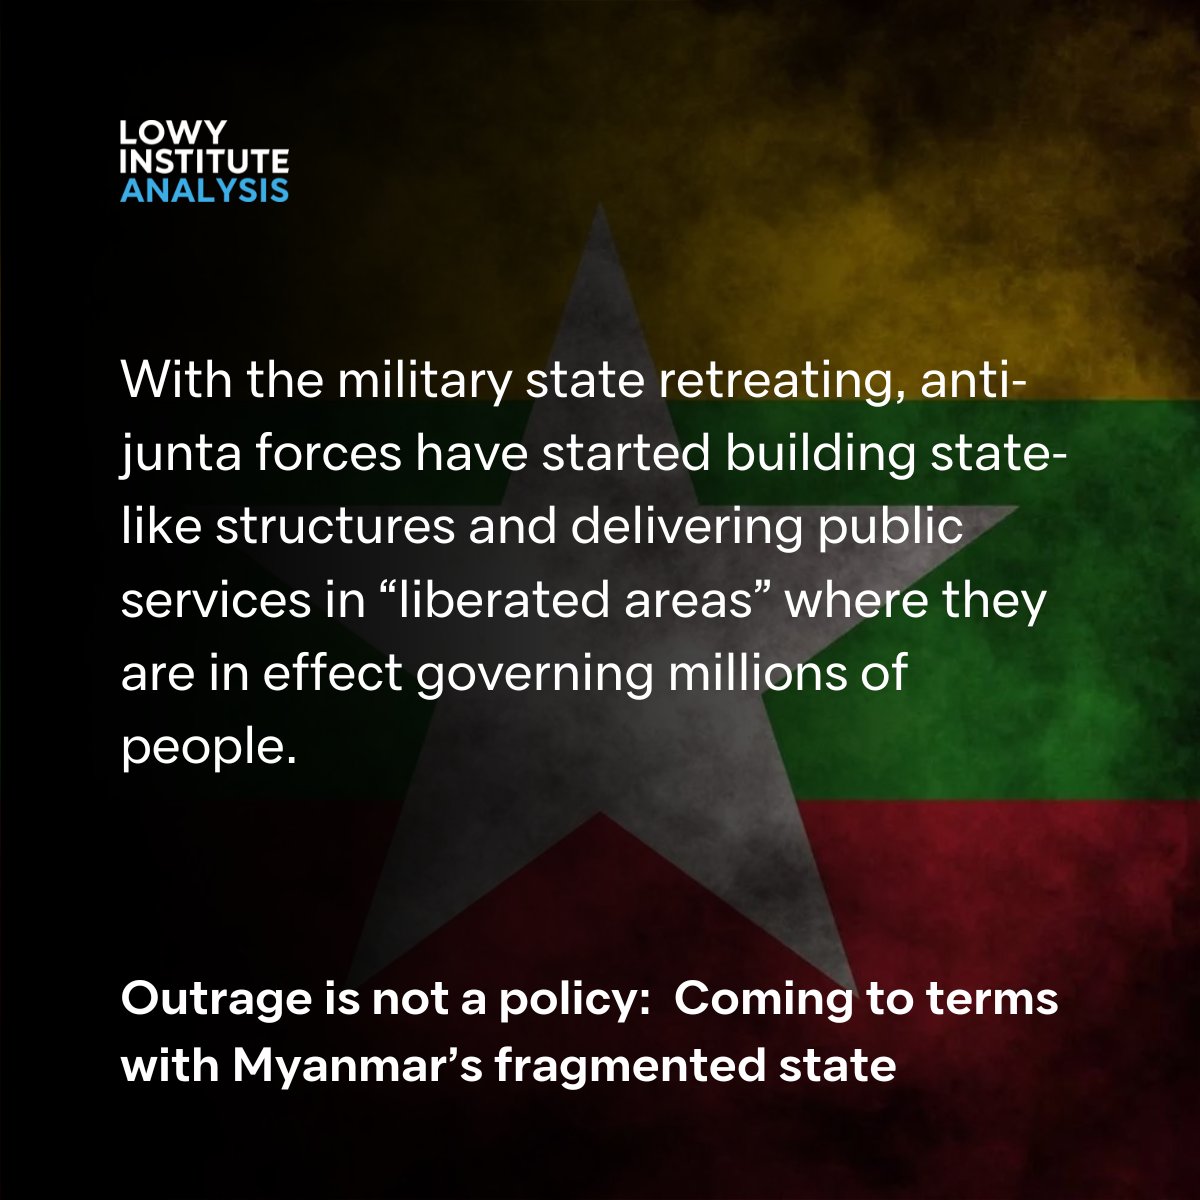 In a new @LowyInstitute Analysis, Morten Pedersen argues the West should support parallel state-building in parts of #Myanmar liberated from the junta's control. ⬇️Read the full Analysis. lowyinstitute.org/publications/o…